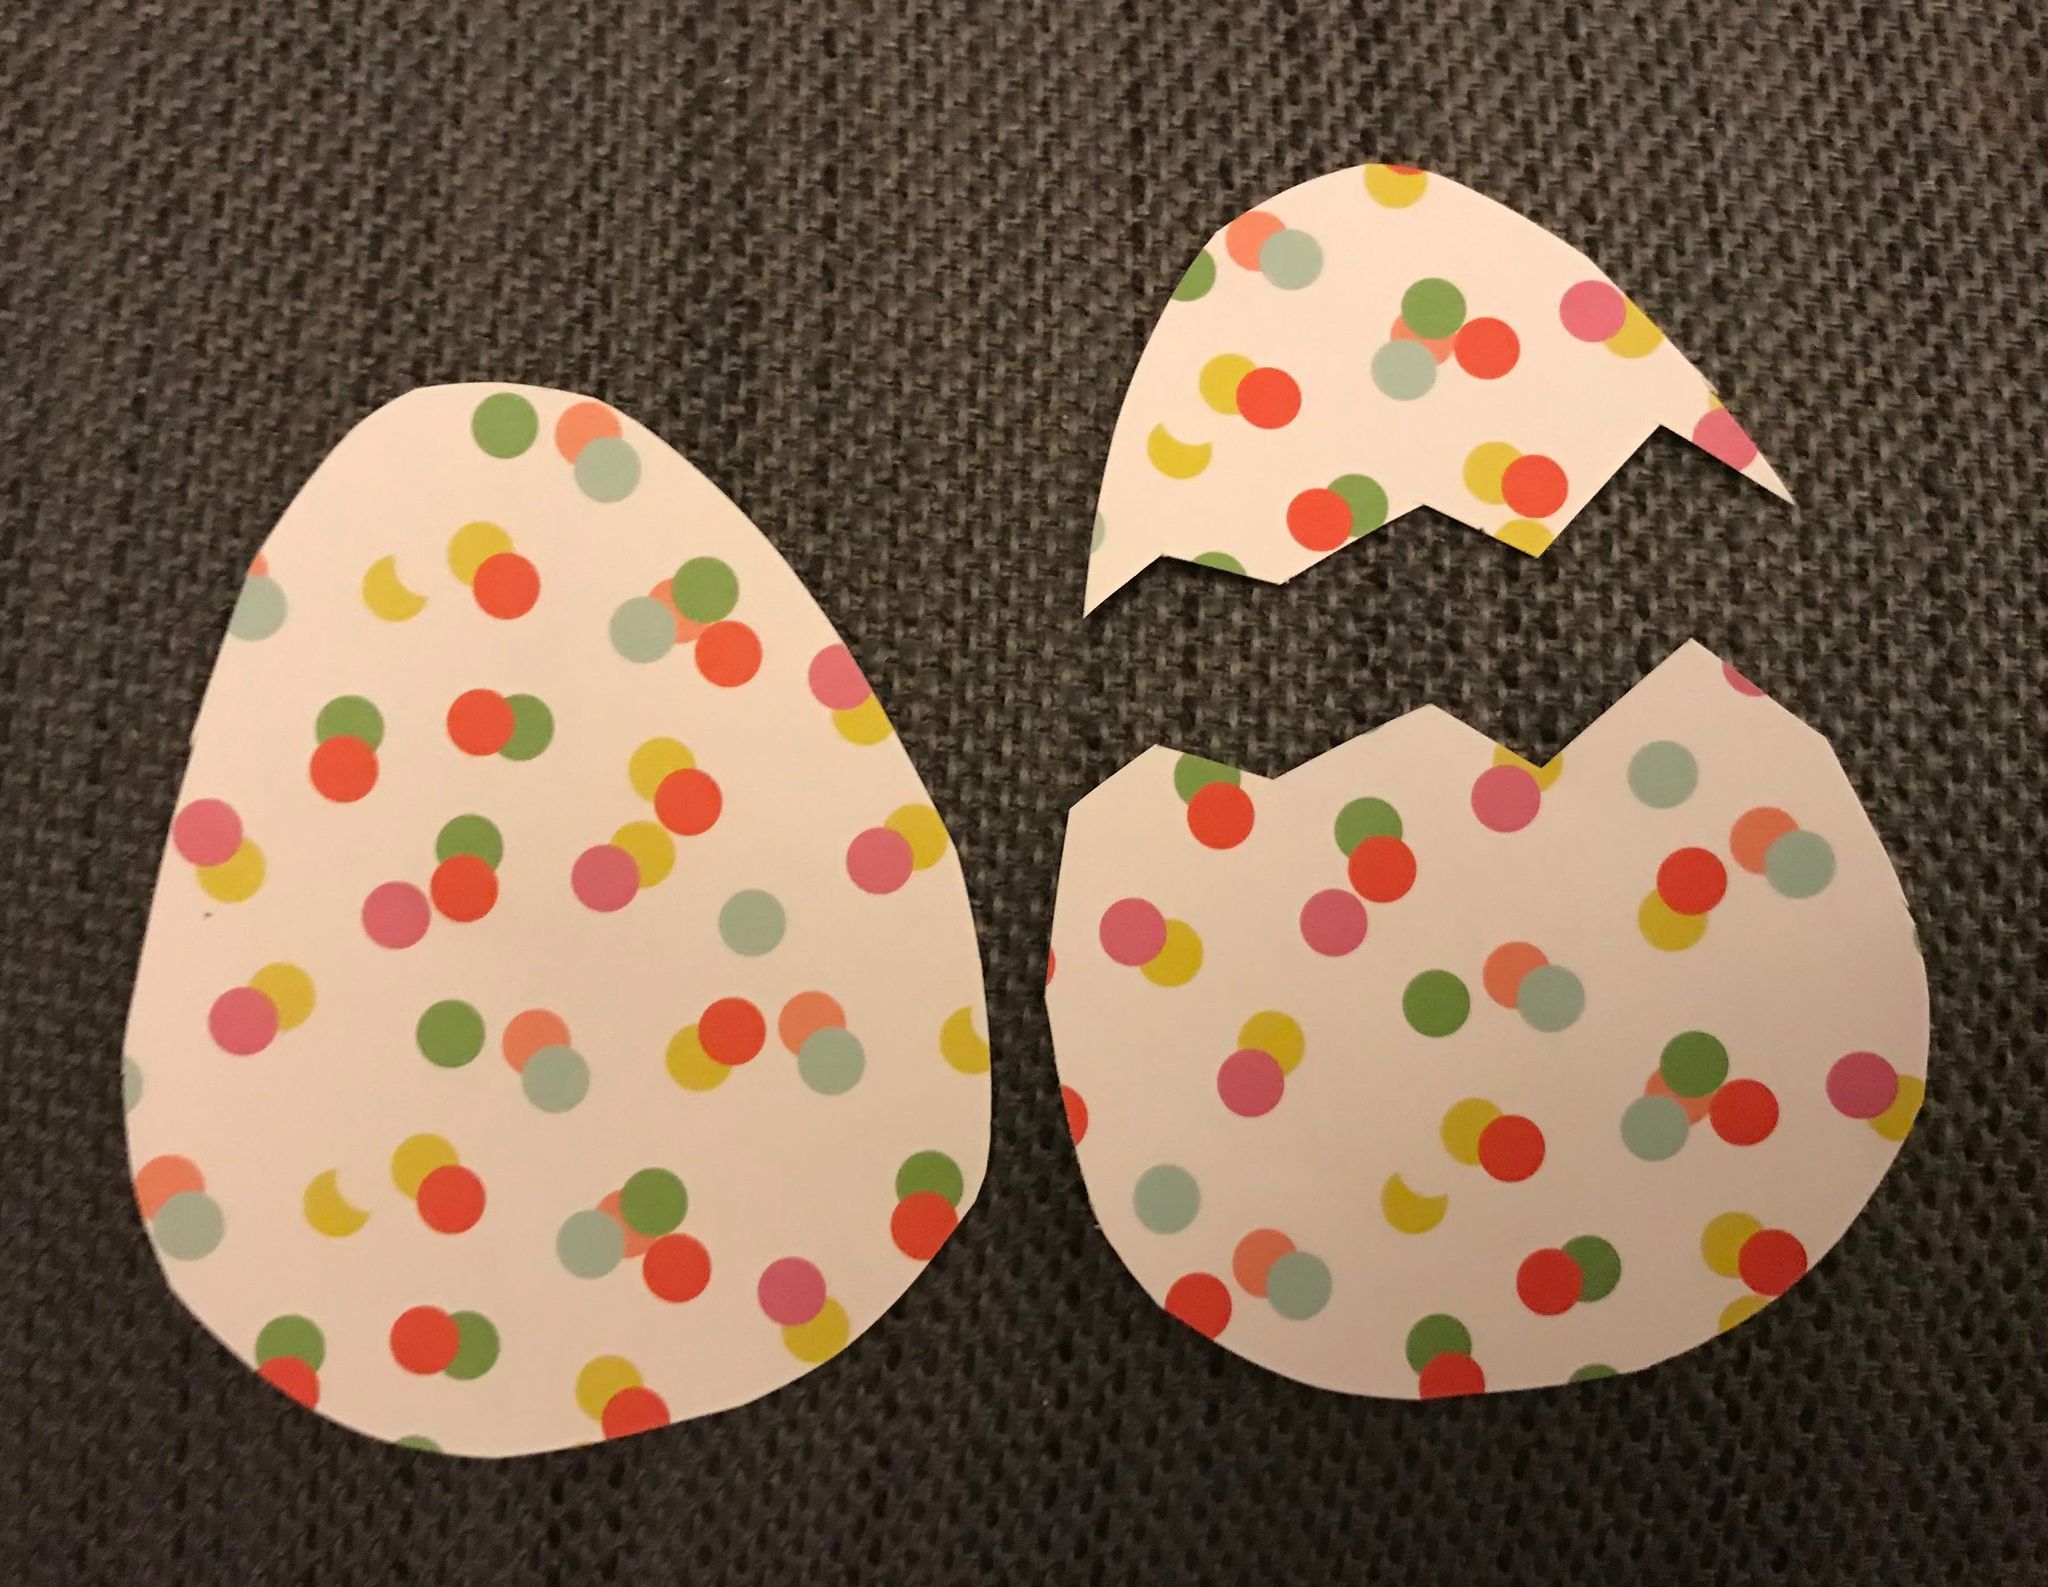 Two egg shapes cut out of colorful polka dot paper, with one egg cut into two "cracked" halves with a zig-zag line 